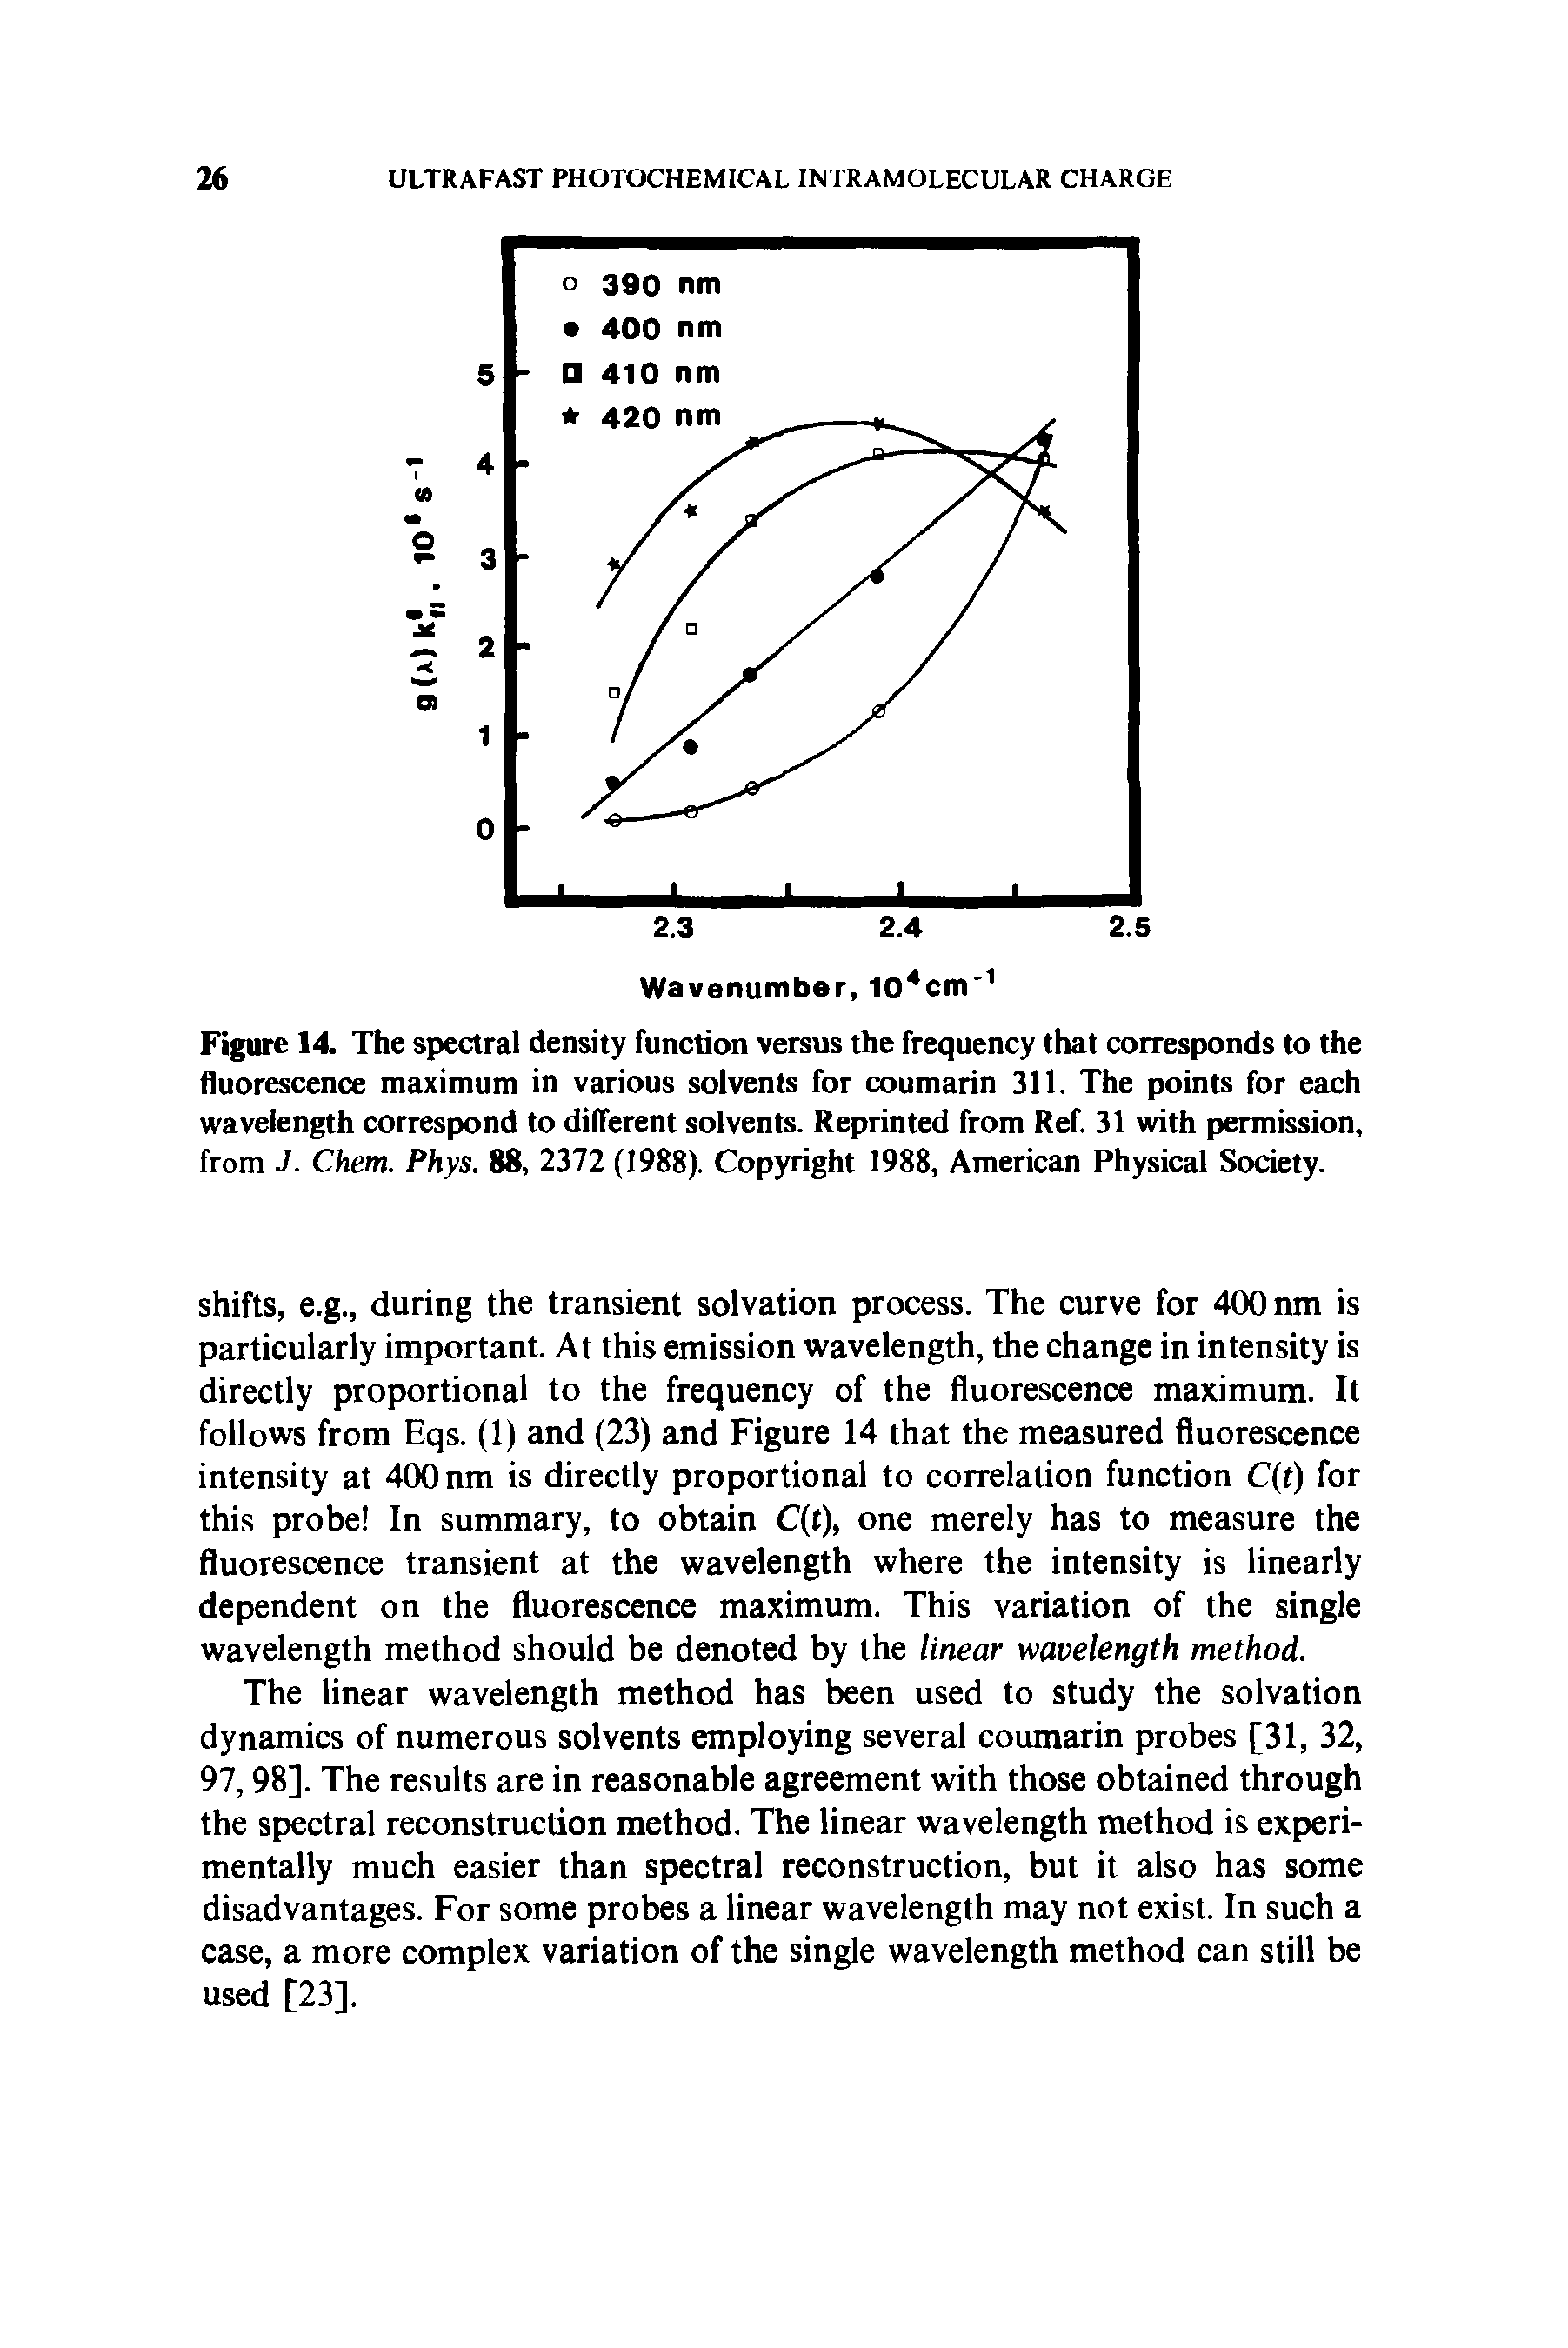 Figure 14. The spectral density function versus the frequency that corresponds to the fluorescence maximum in various solvents for coumarin 311. The points for each wavelength correspond to different solvents. Reprinted from Ref. 31 with permission, from J. Chem. Phys. 88, 2372 (1988). Copyright 1988, American Physical Society.